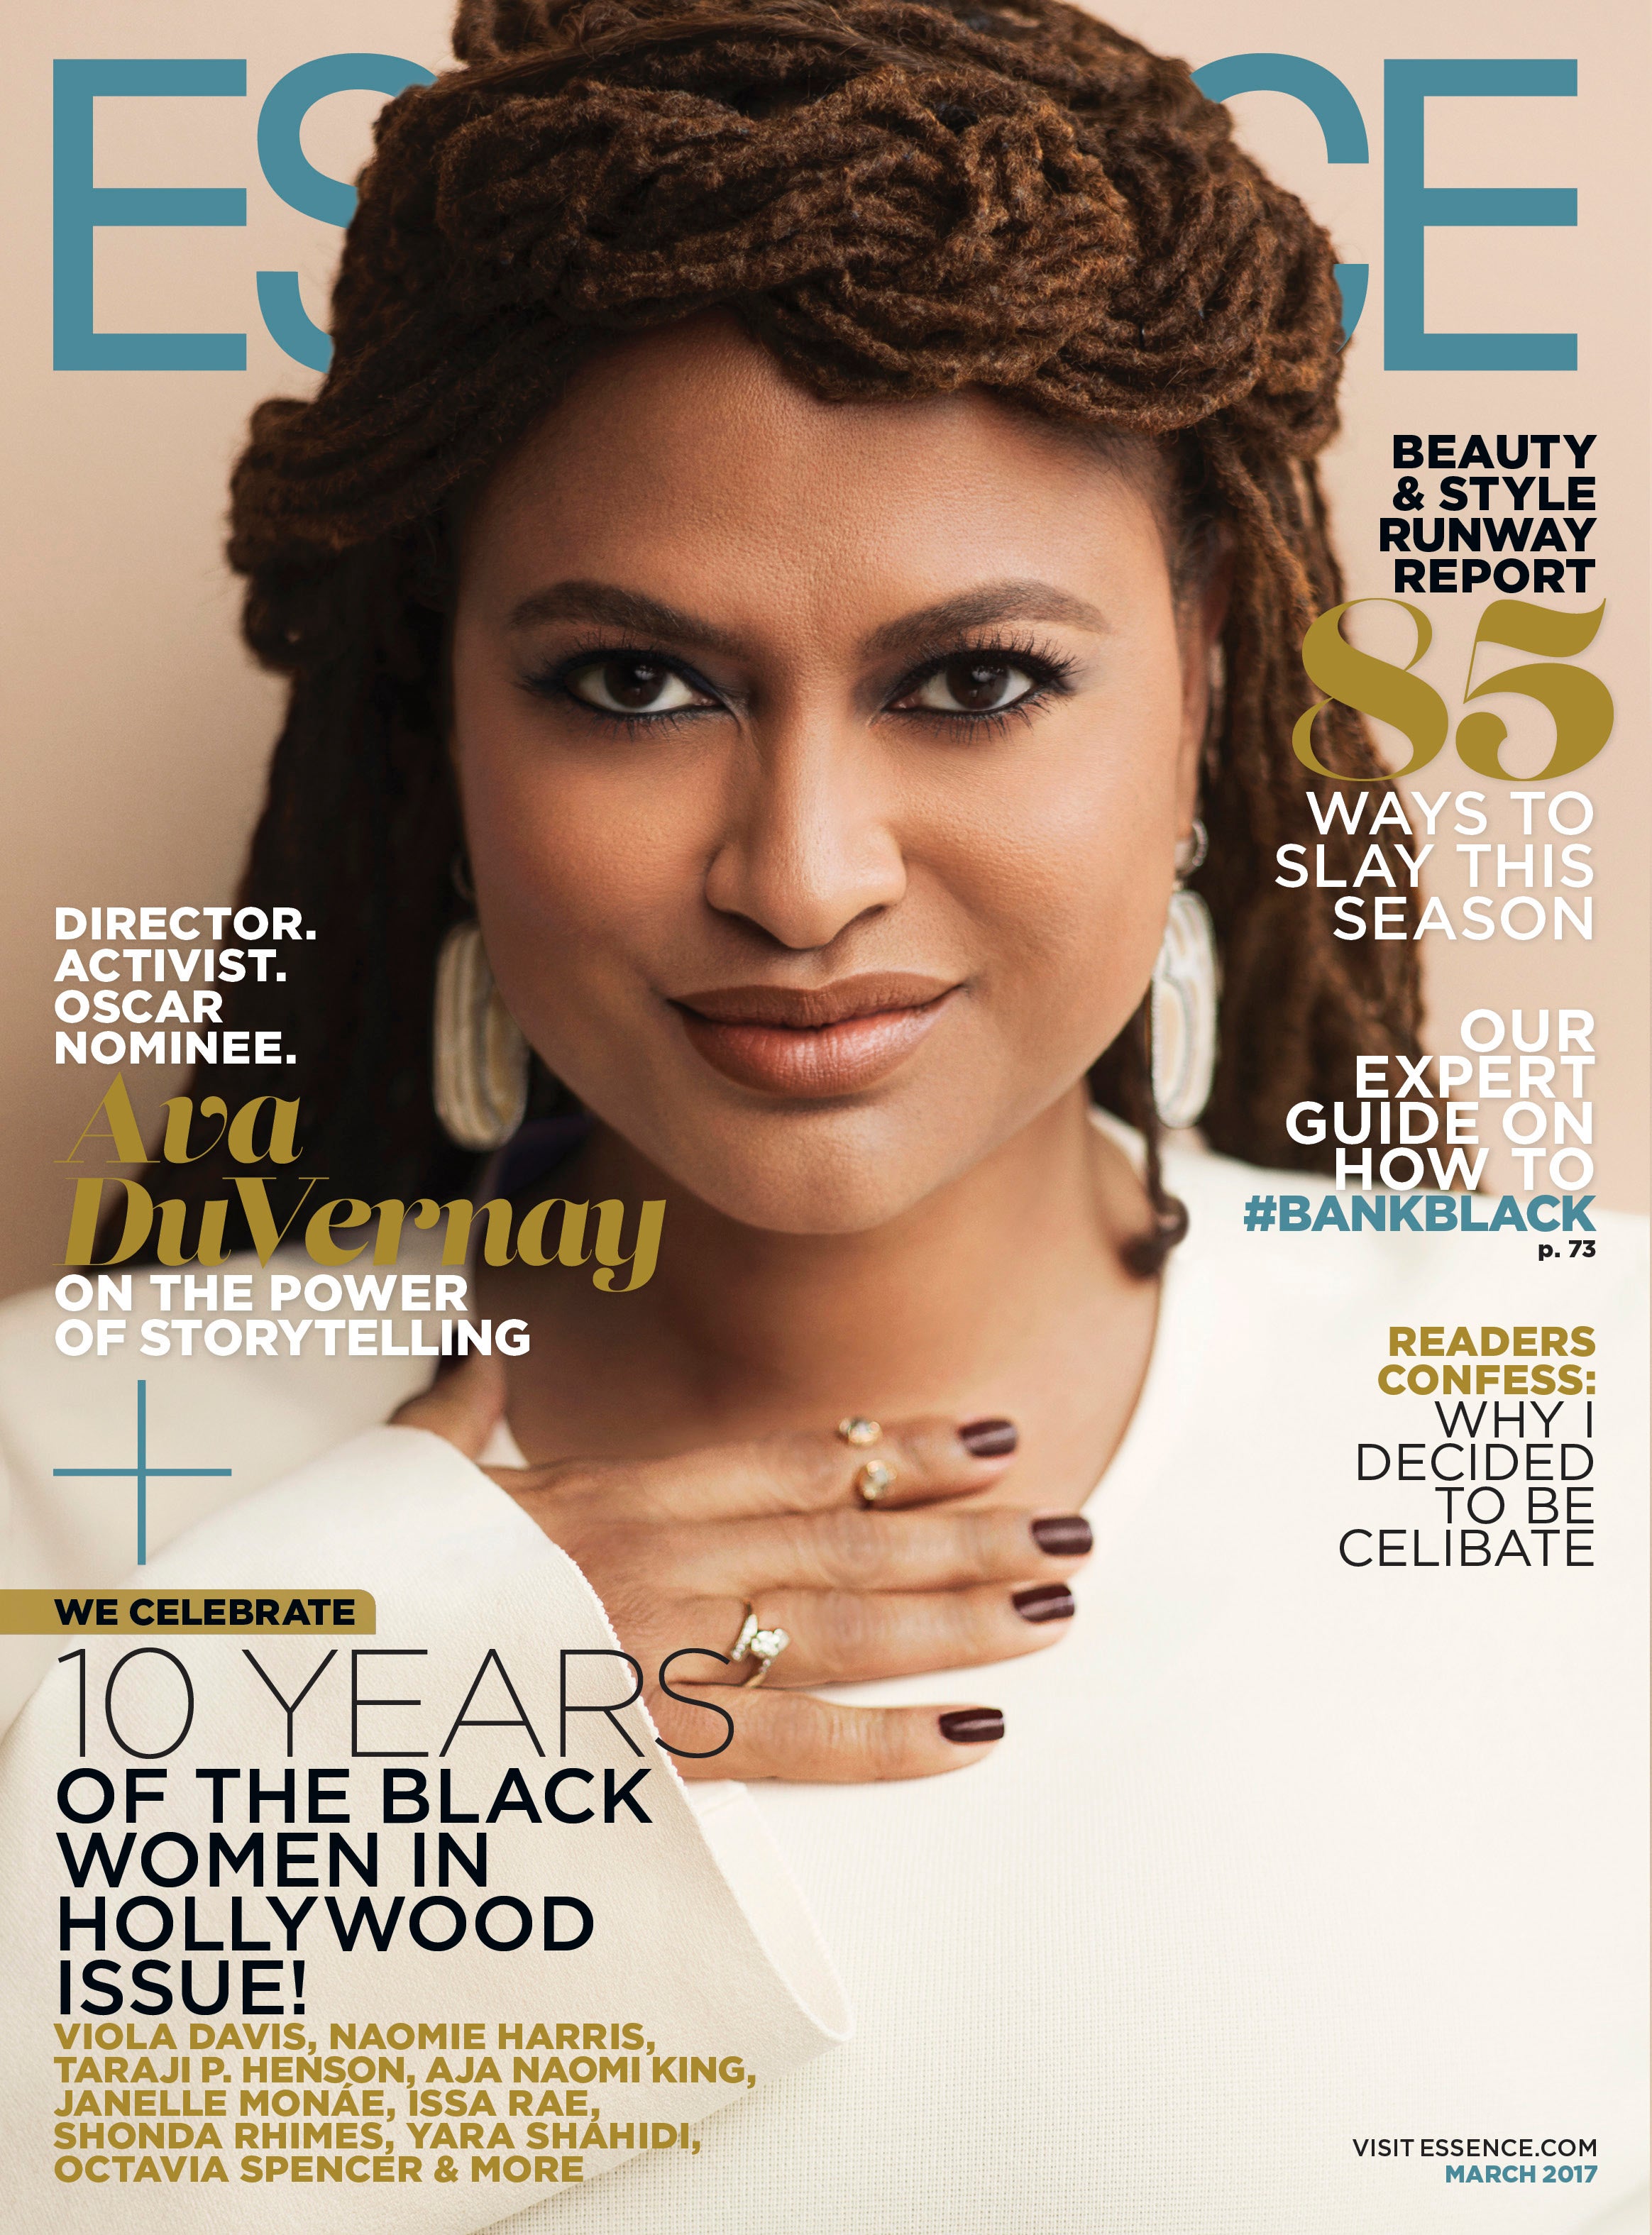 Ava DuVernay Covers ESSENCE's March 2017 Issue
